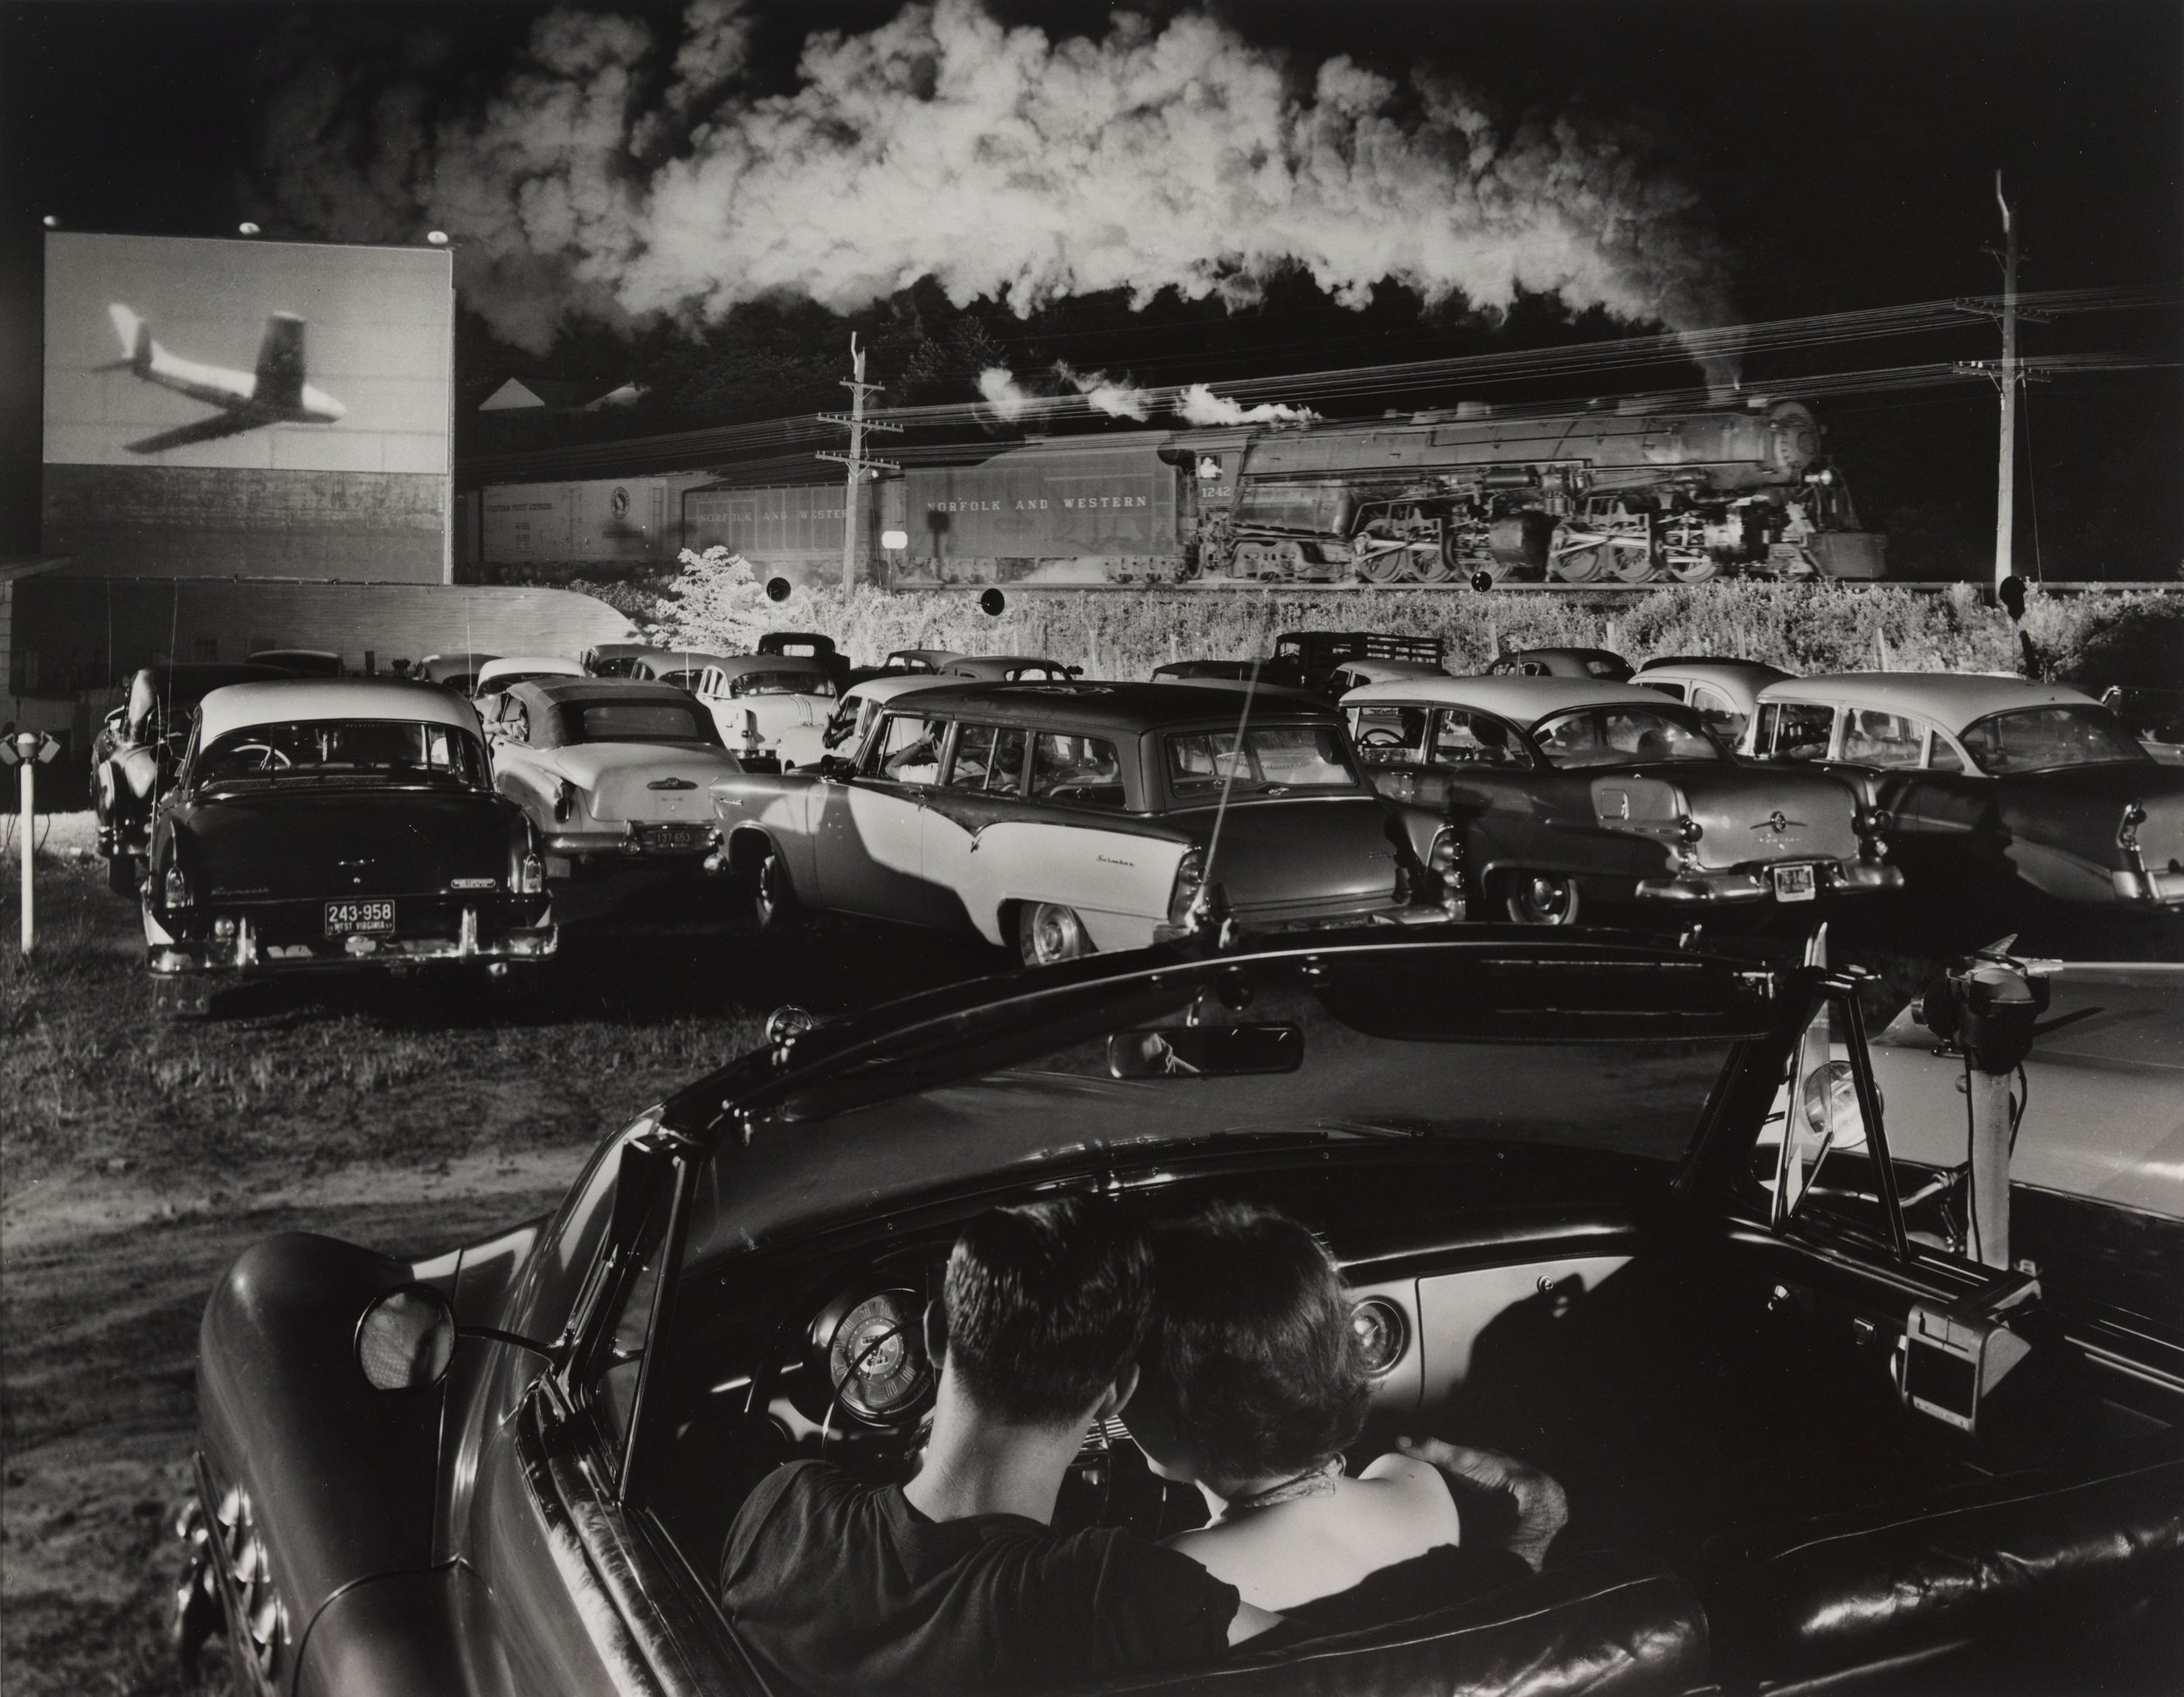  Ogle Winston Link (United States, 1914–2001 ), Hot Shot Eastbound, Iaeger, West Virginia , 1957, gelatin silver print, 14 1/8 x 18 1/8 inches. Promised Gift from the Judy Glickman Lauder Collection, 16.2018.8. Image courtesy Luc Demers. © O. Winston